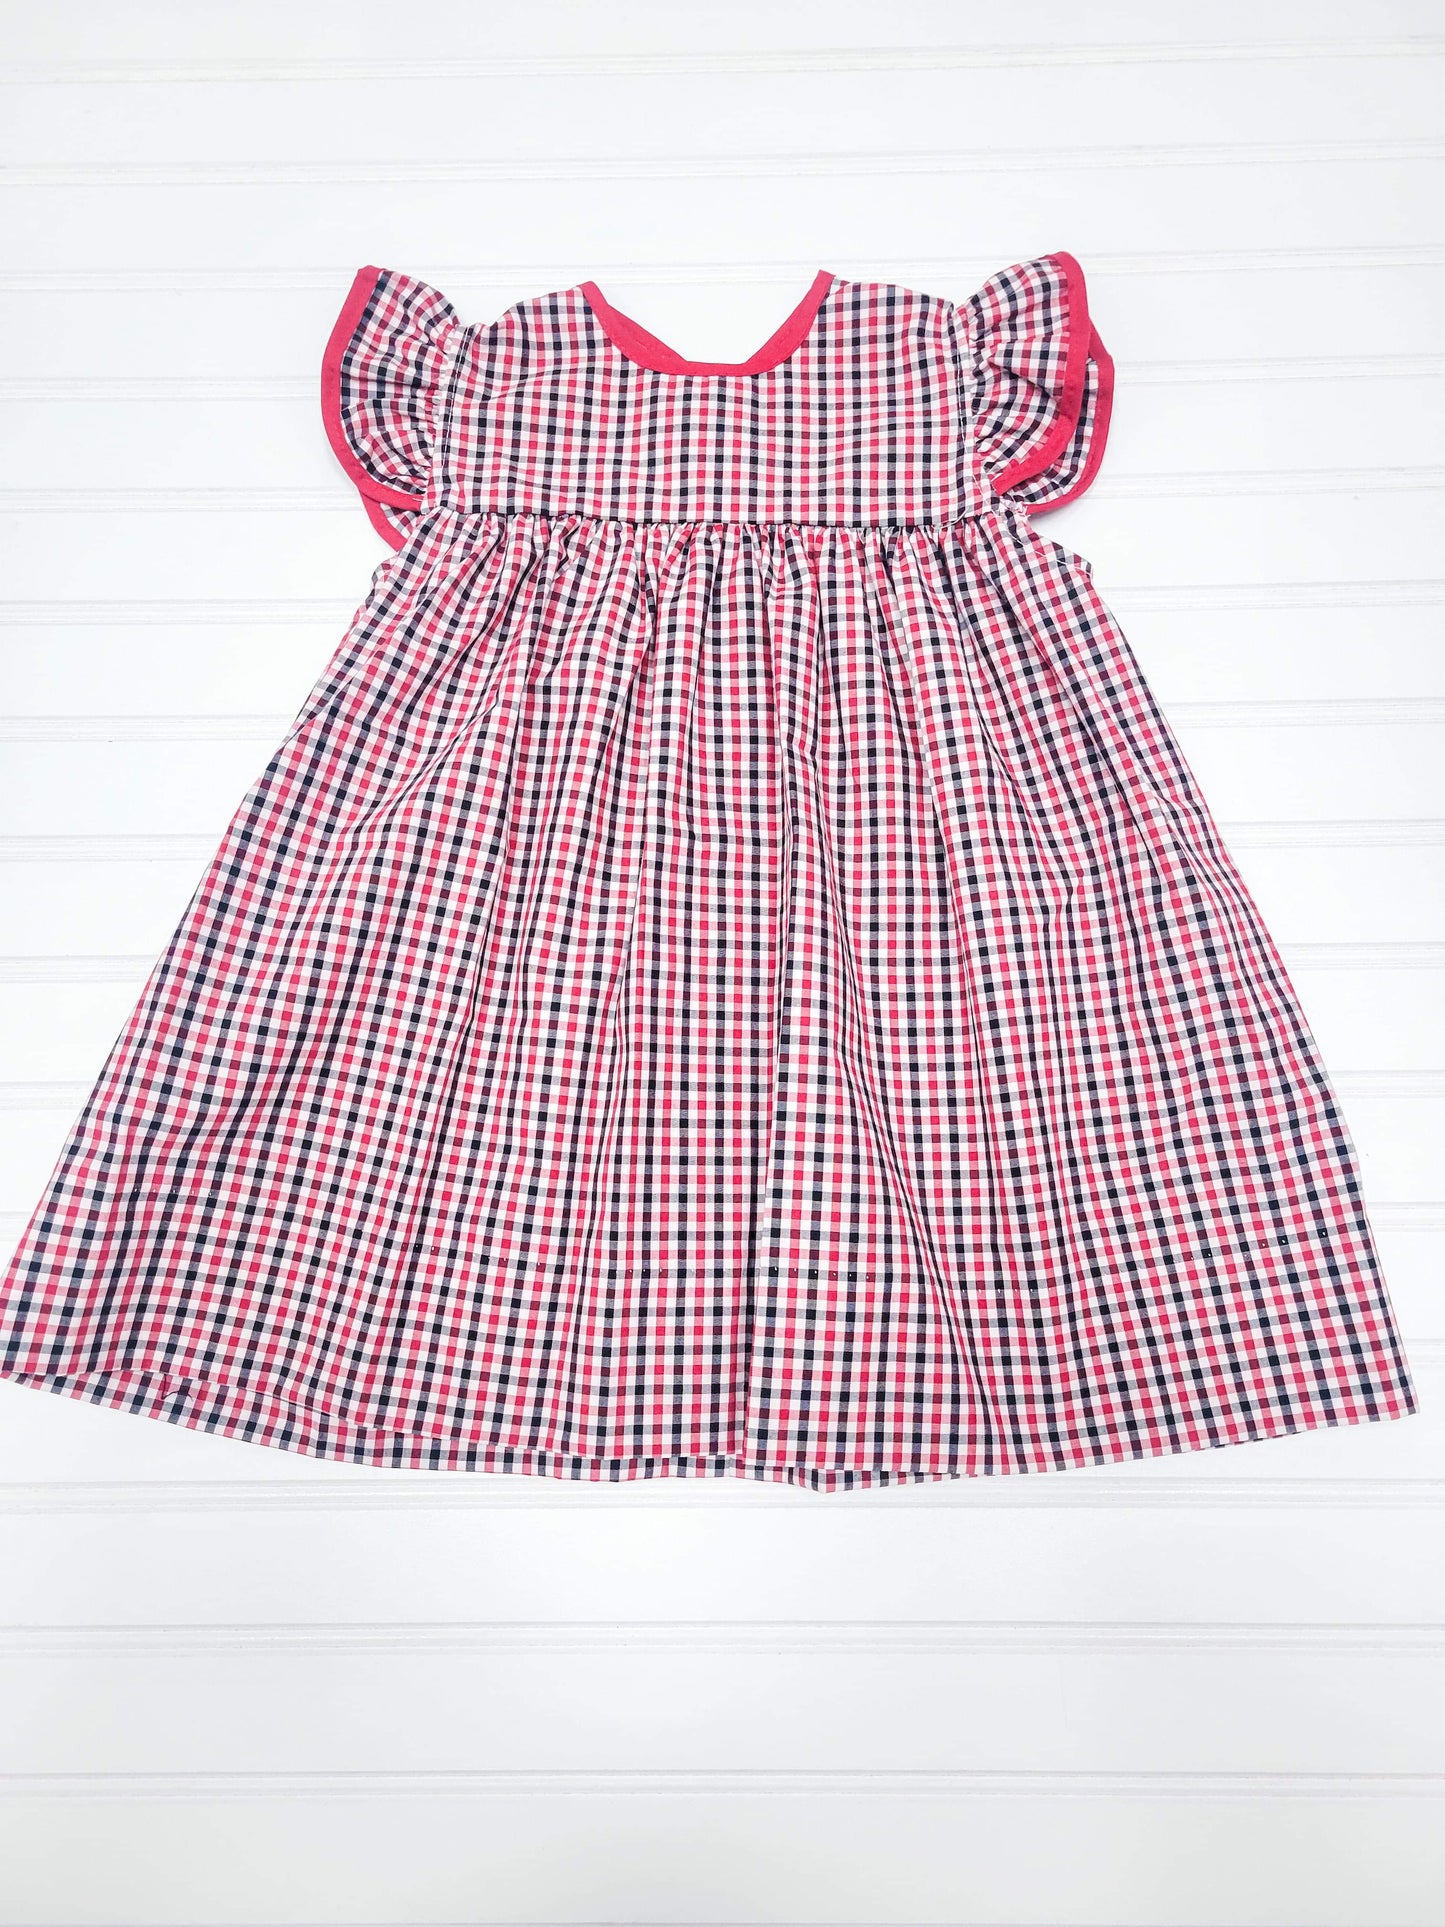 Dress with Bow - Red/Black Plaid